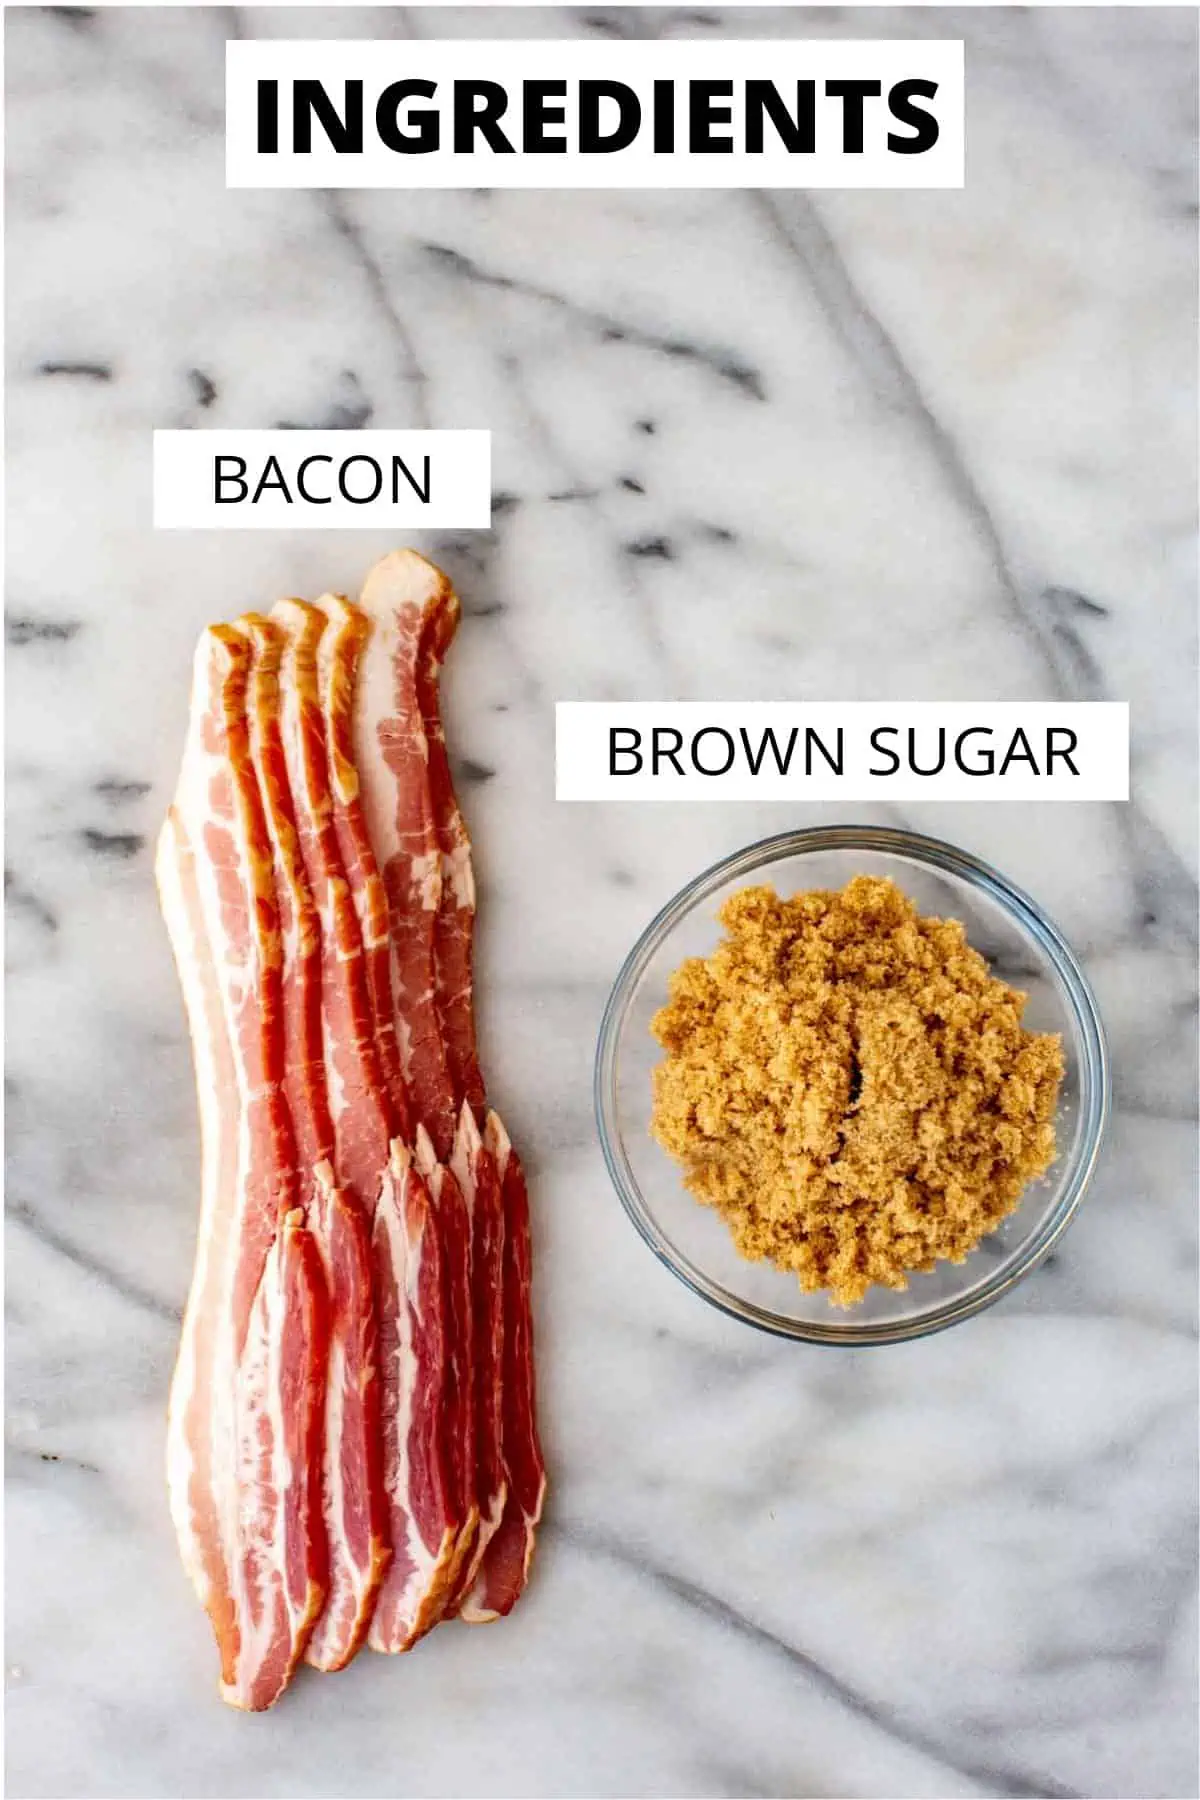 Ingredients for brown sugar bacon.